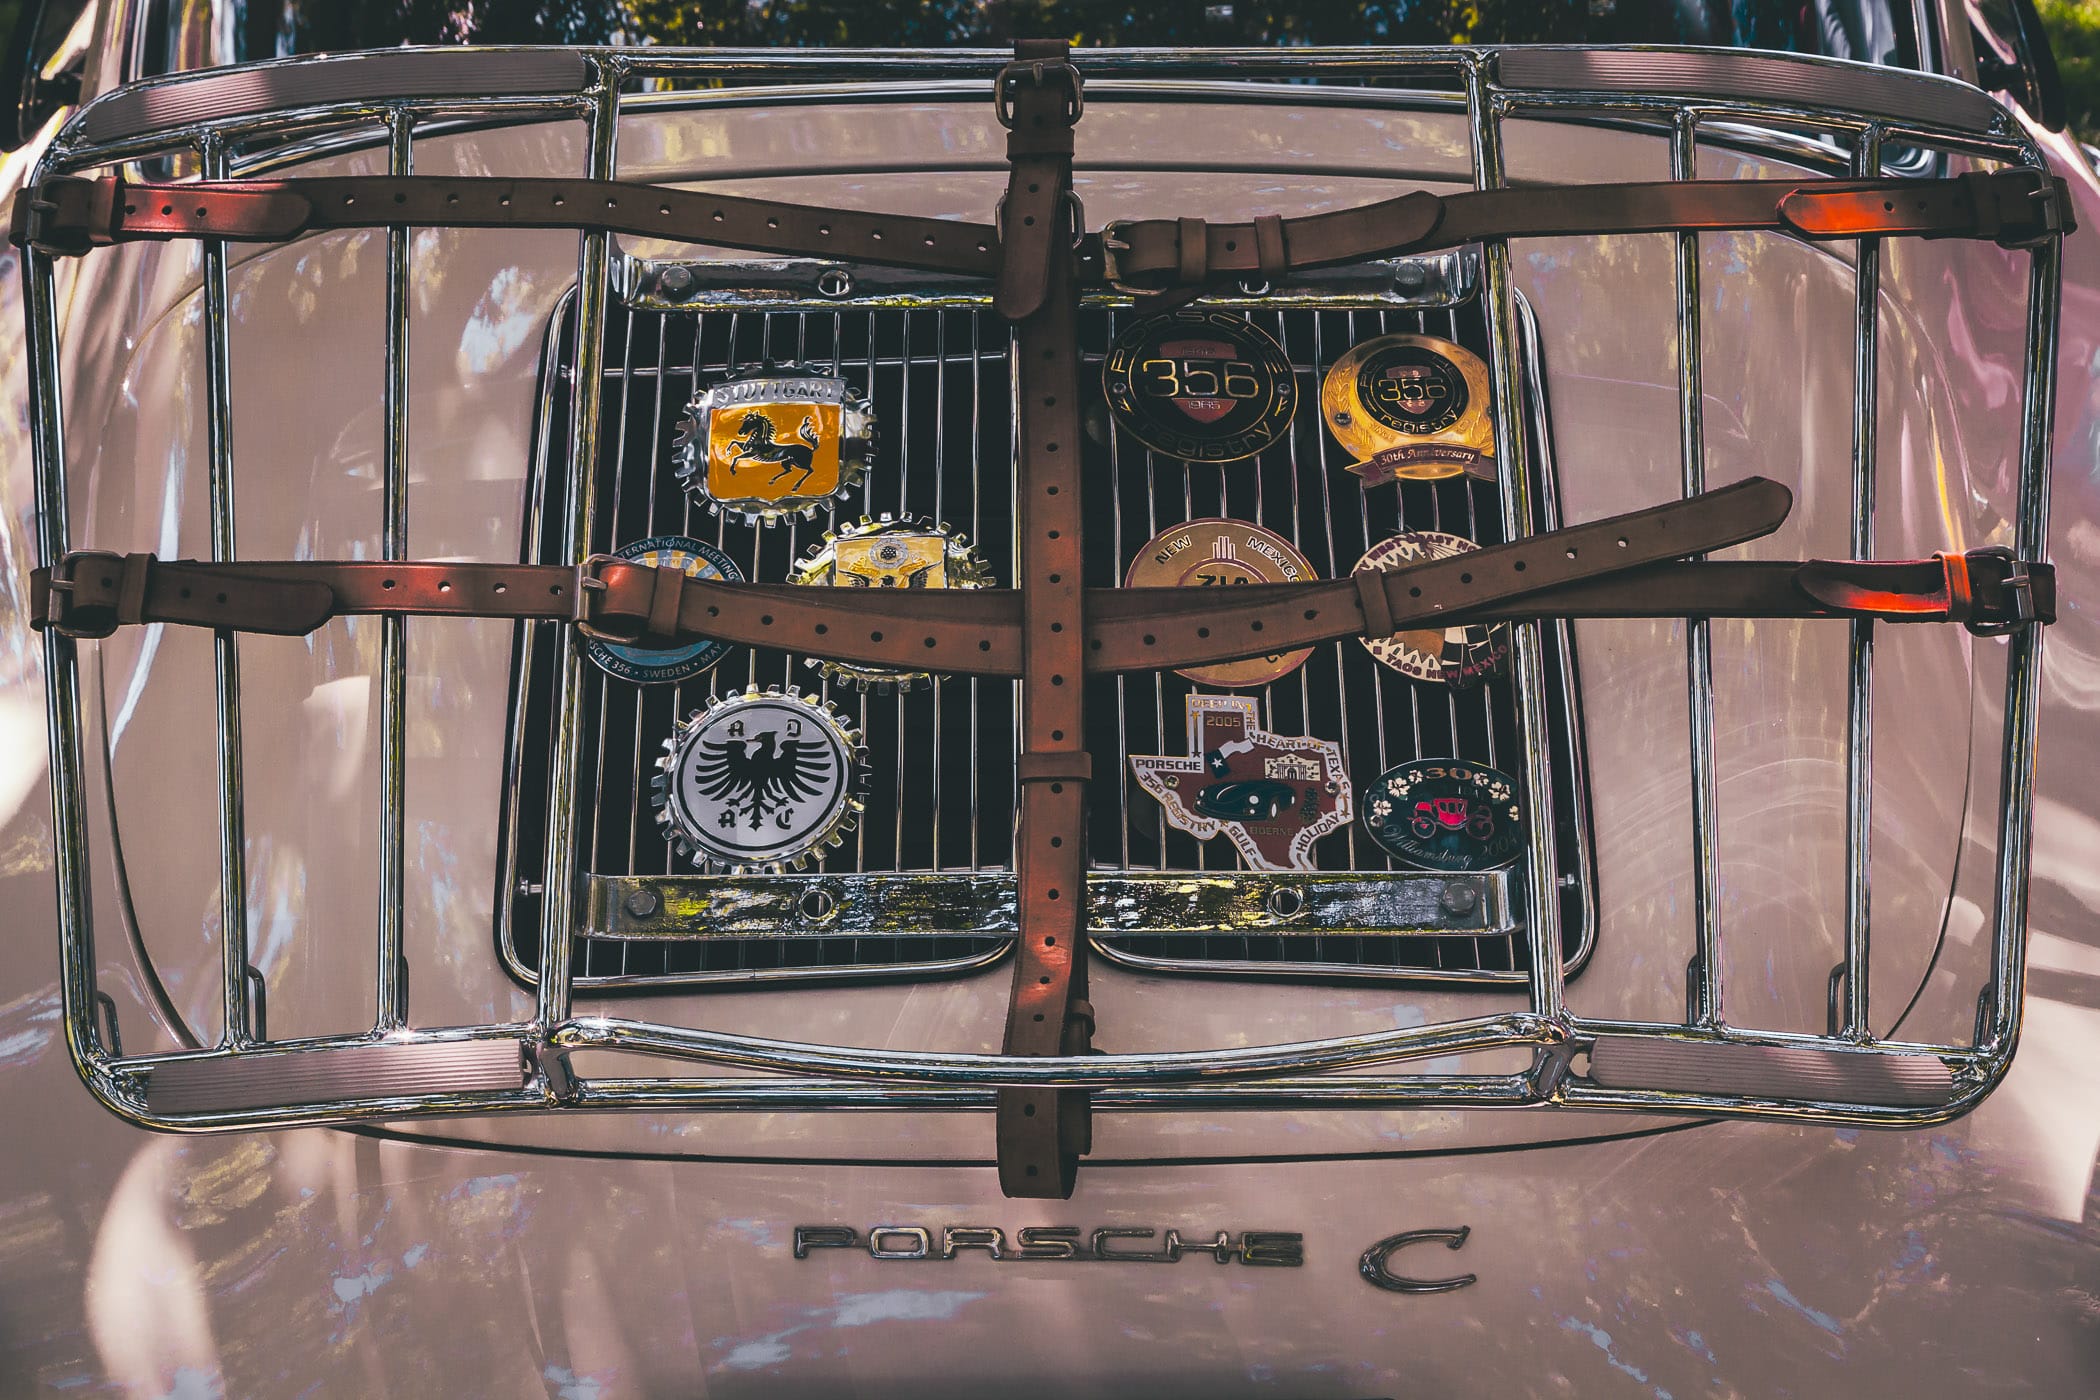 The luggage rack on a classic Porsche 356 Cabriolet, spotted at Dallas' Autos in the Park event.